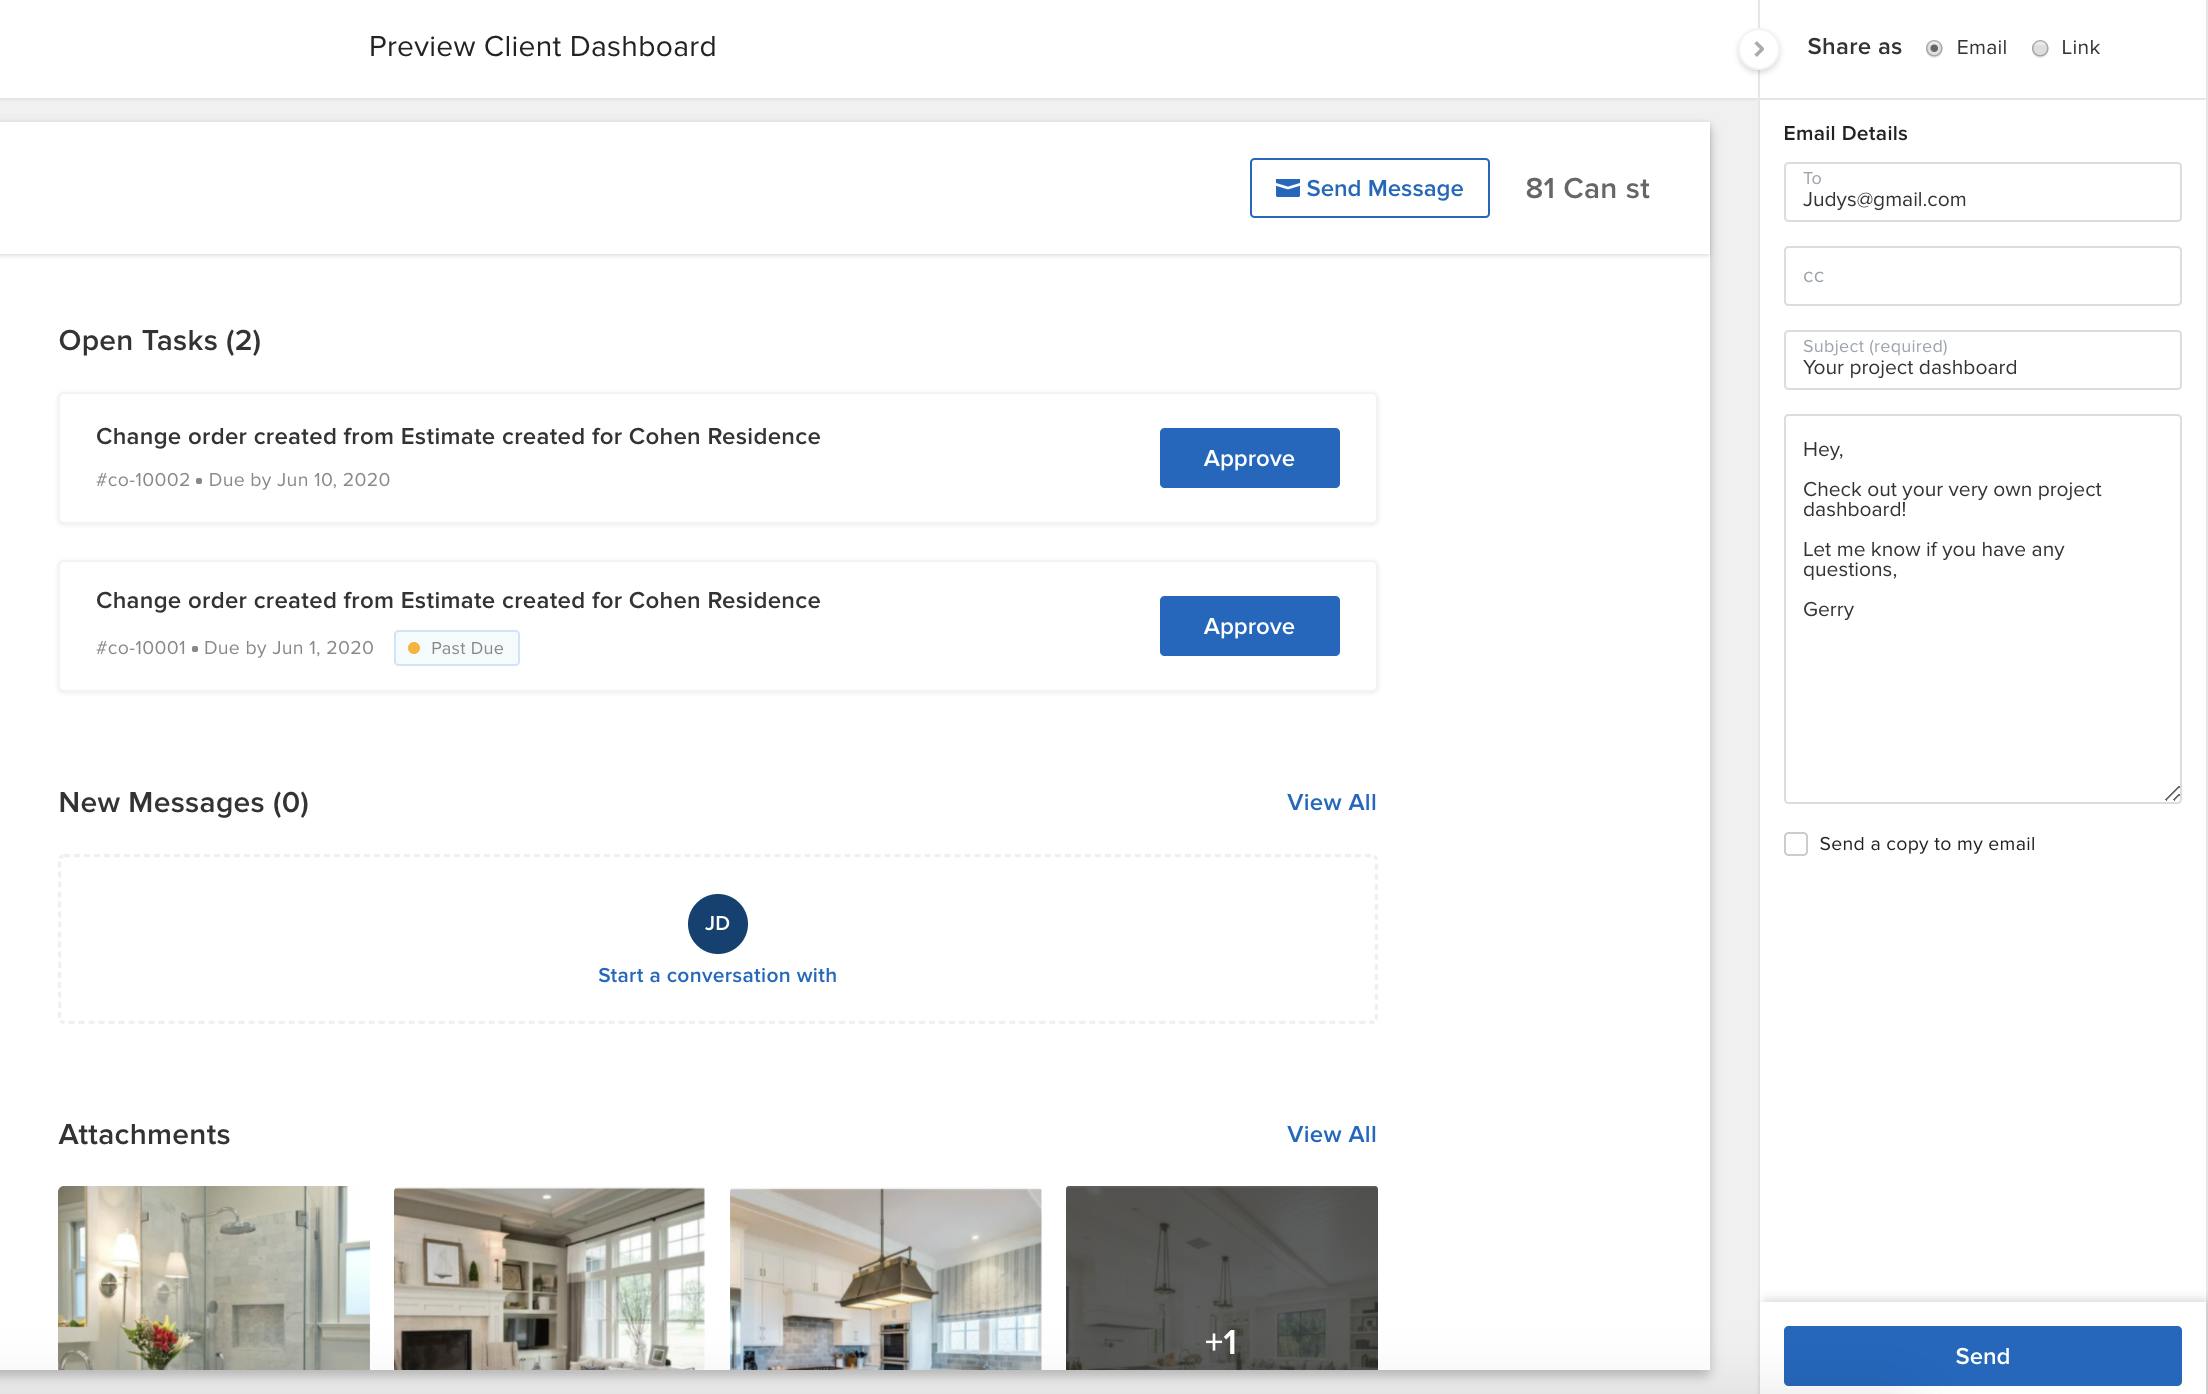 How to Preview and Share the Client Dashboard | Houzz